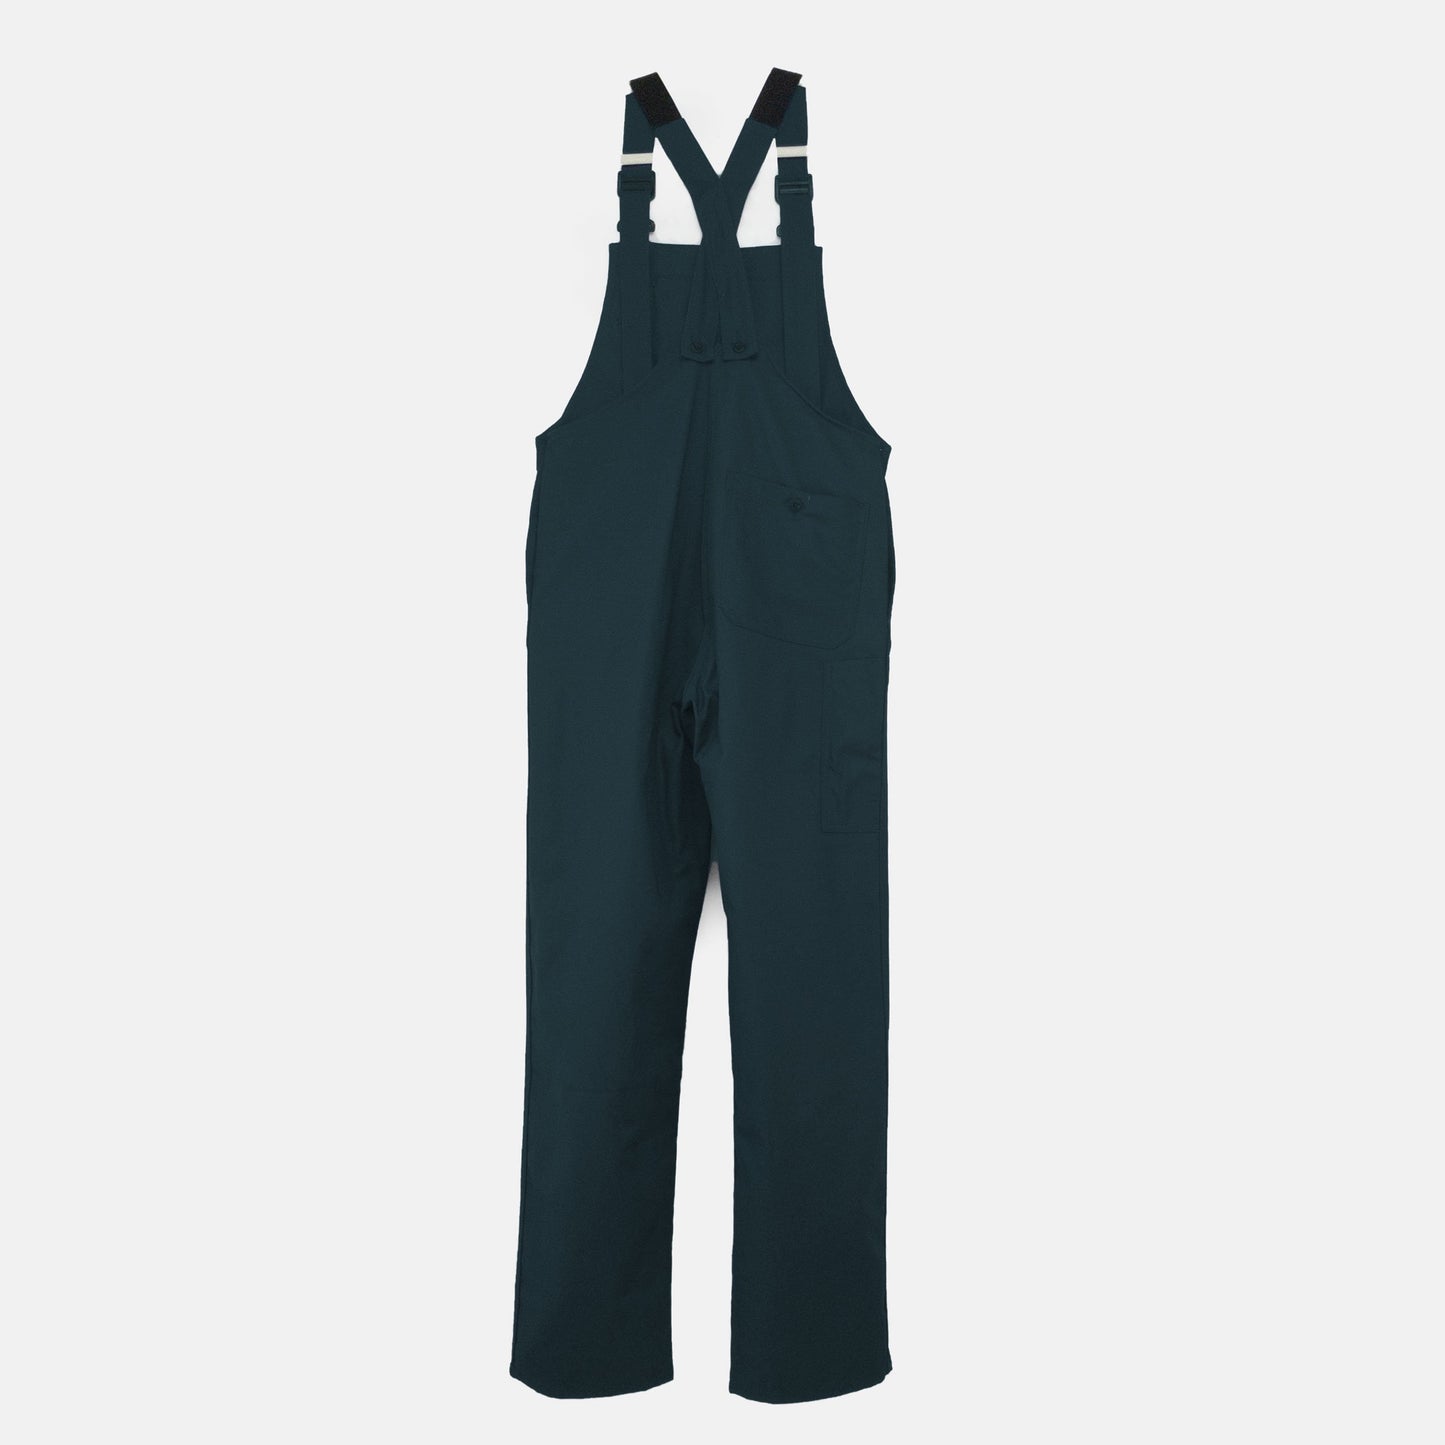 Le Laboureur French Cotton Blend Overalls in French Green